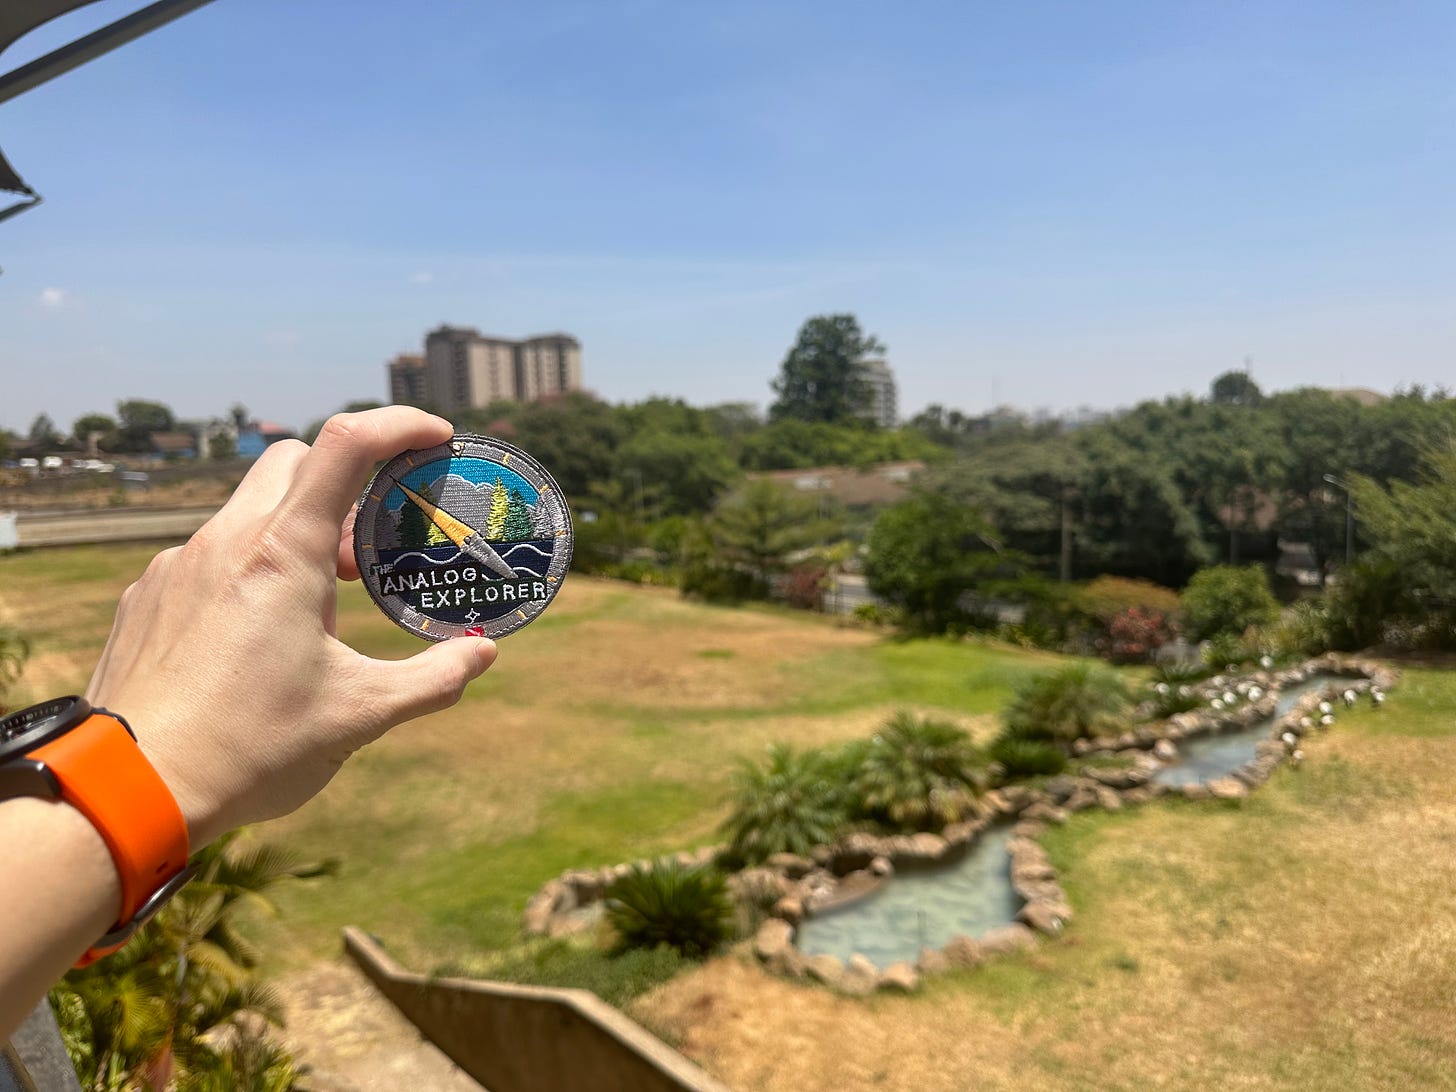 ANalog Explorer patch being held up to the skyline of Nairobi 